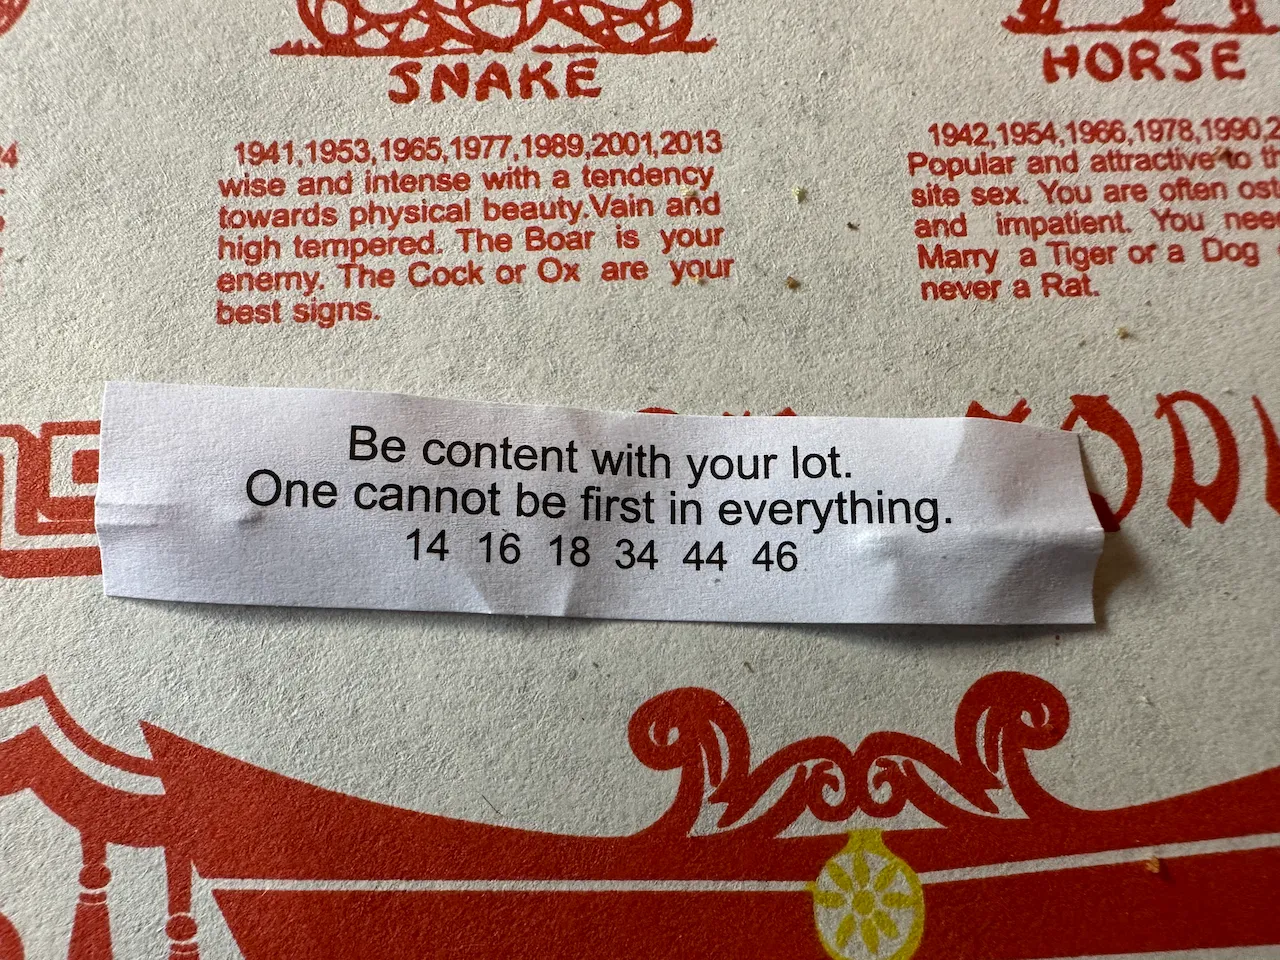 A fortune from a fortune cookie, which reads Be content with your lot, one cannot be first in everything.